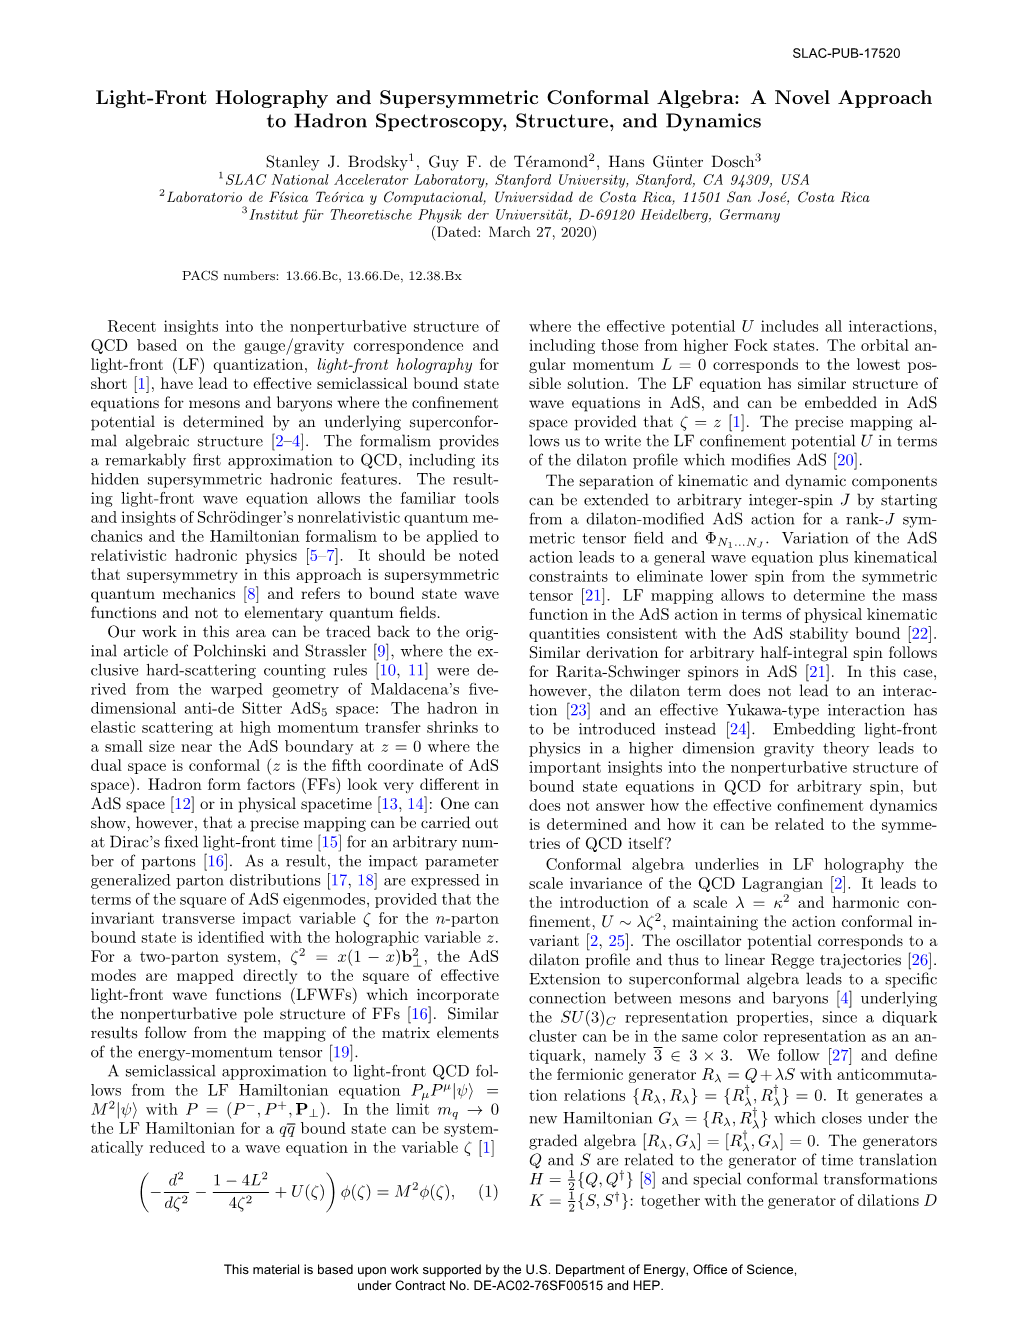 Light-Front Holography and Supersymmetric Conformal Algebra: a Novel Approach to Hadron Spectroscopy, Structure, and Dynamics